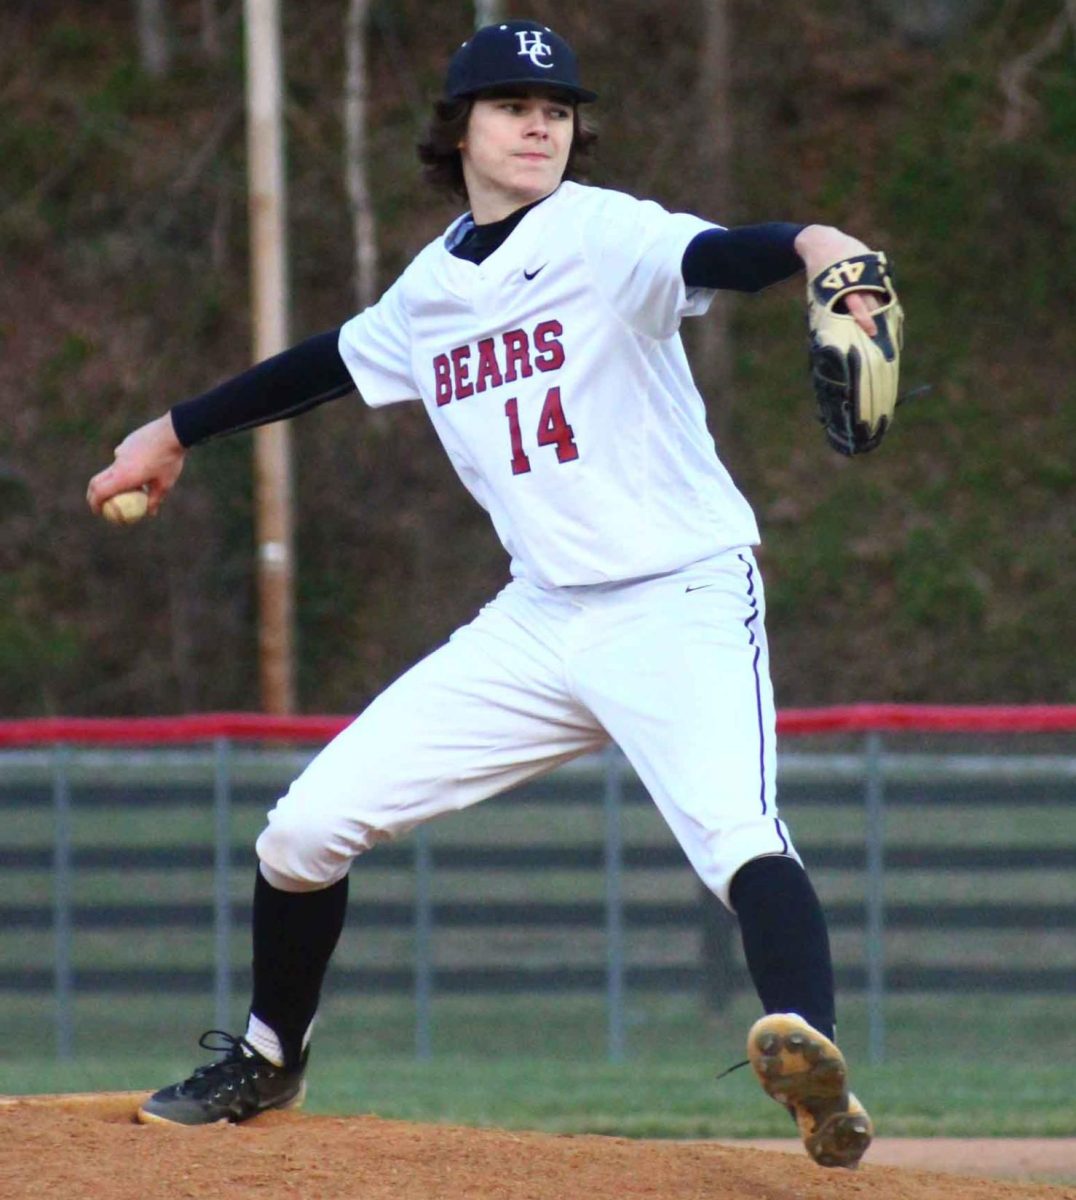 Harlan County senior Tristan Cooper struck out 12 in the Bears win over Southwestern on Saturday.